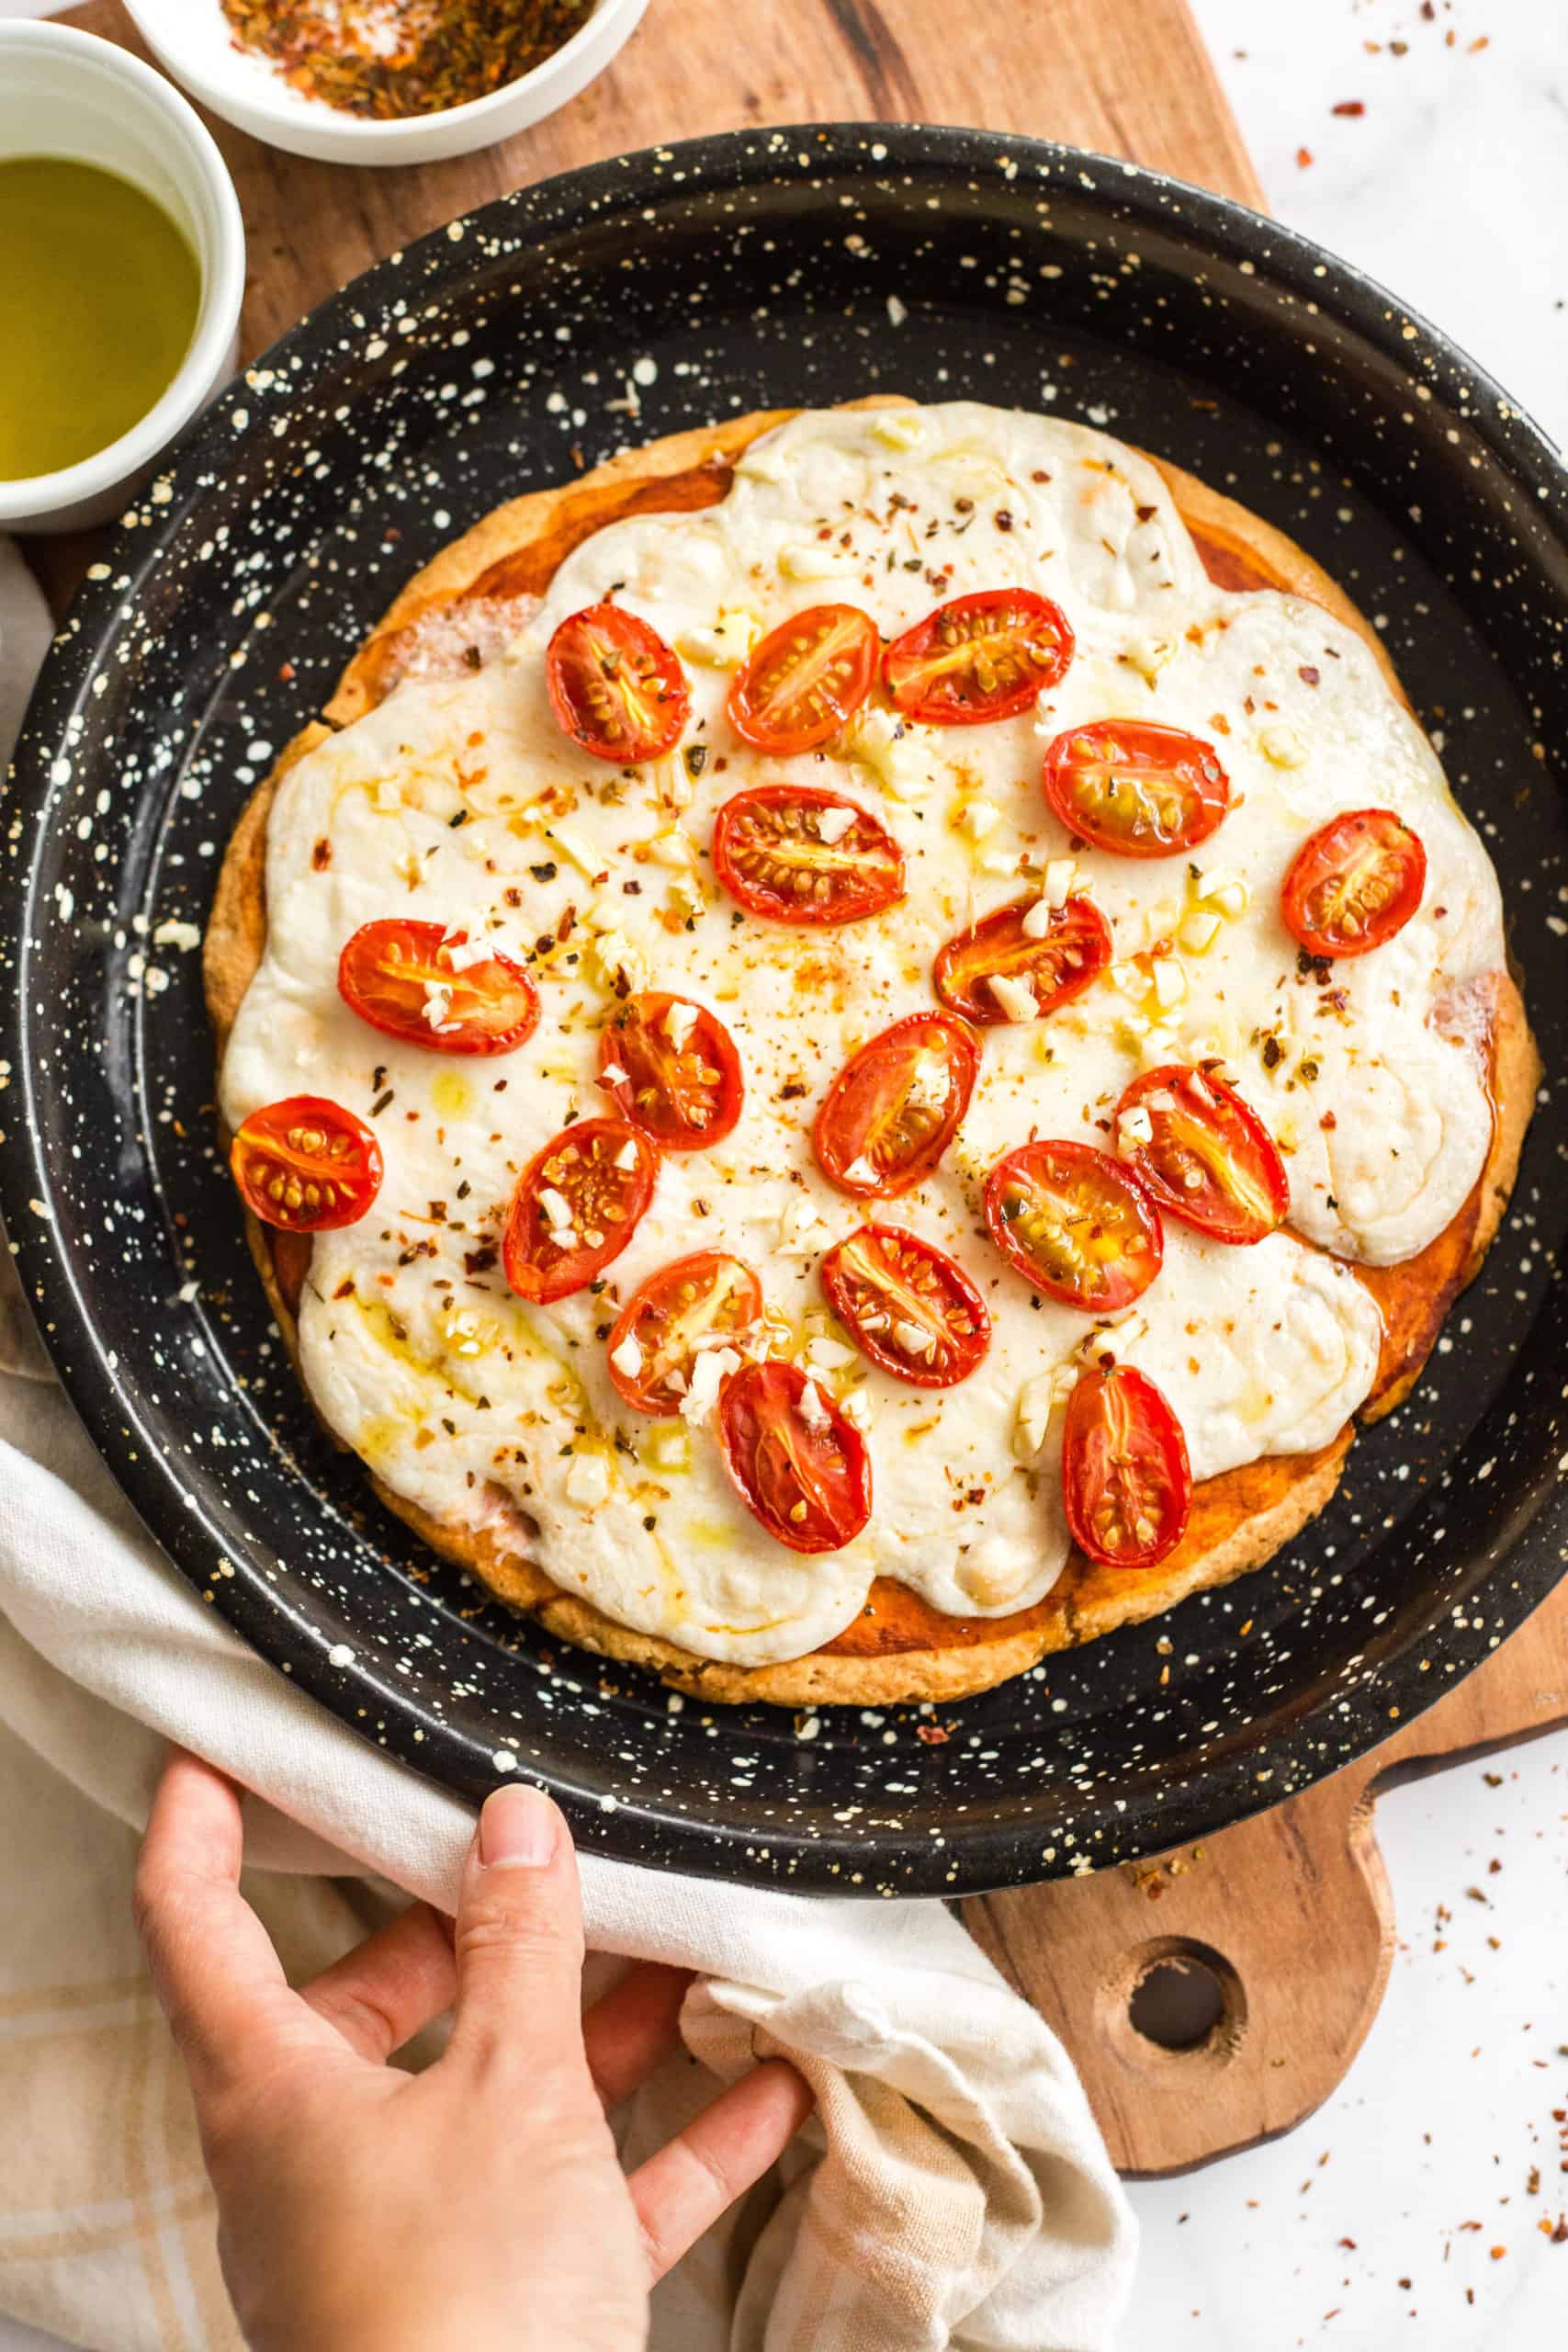 Gluten-free pizza in a pizza pan.